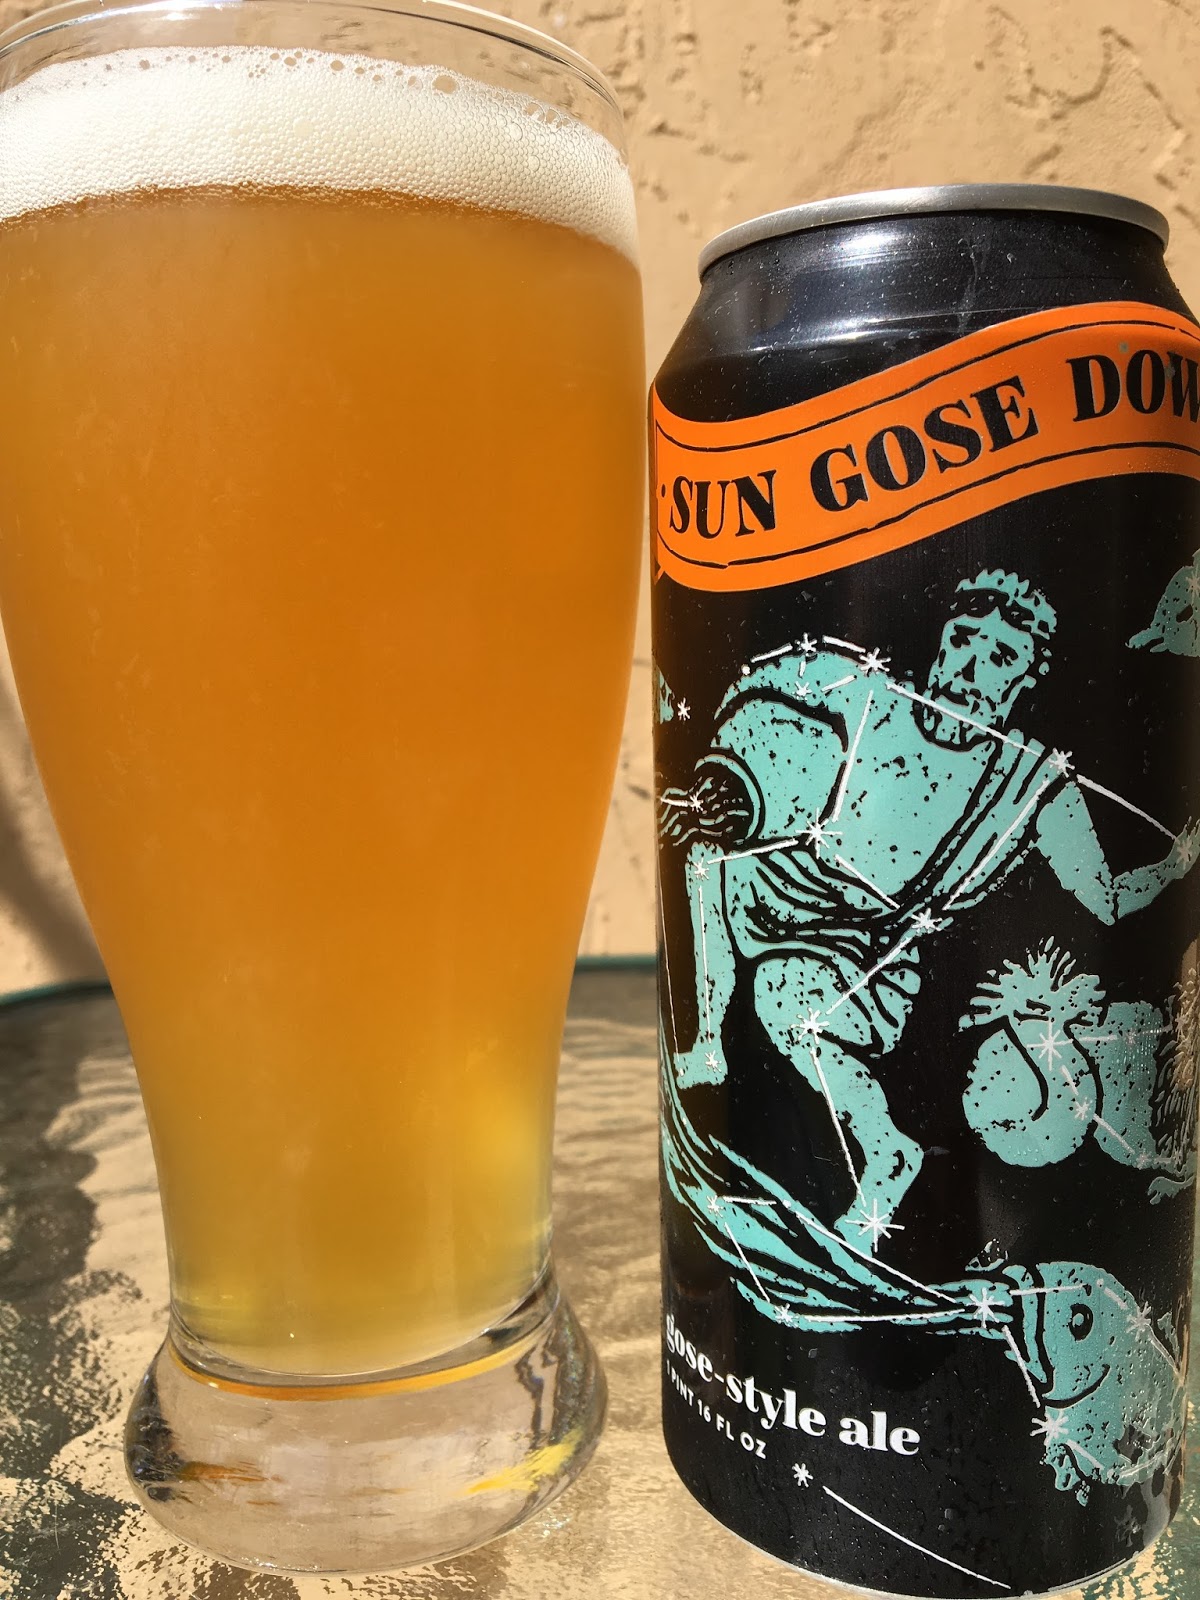 Daily Beer Review: Sun Gose Down